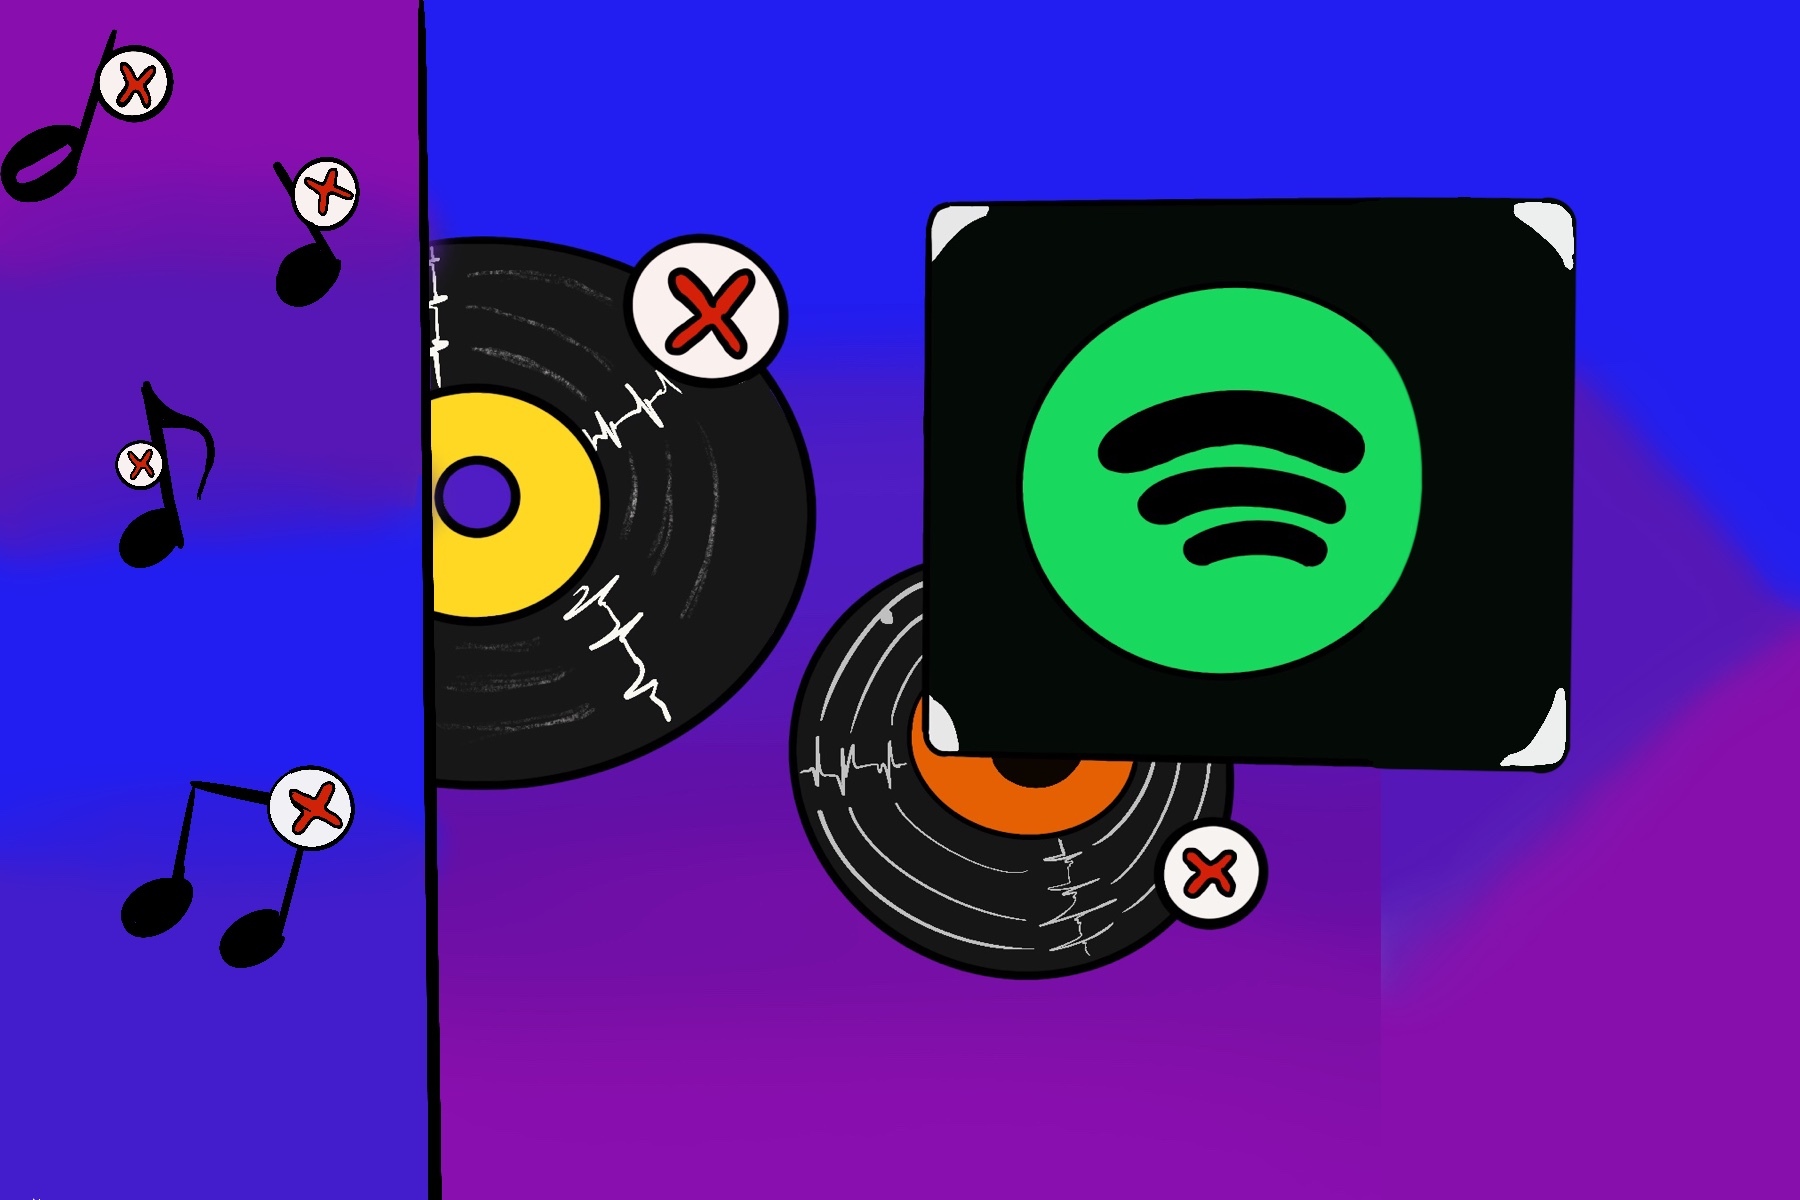 An illustration of the Spotify app, with records in the background.